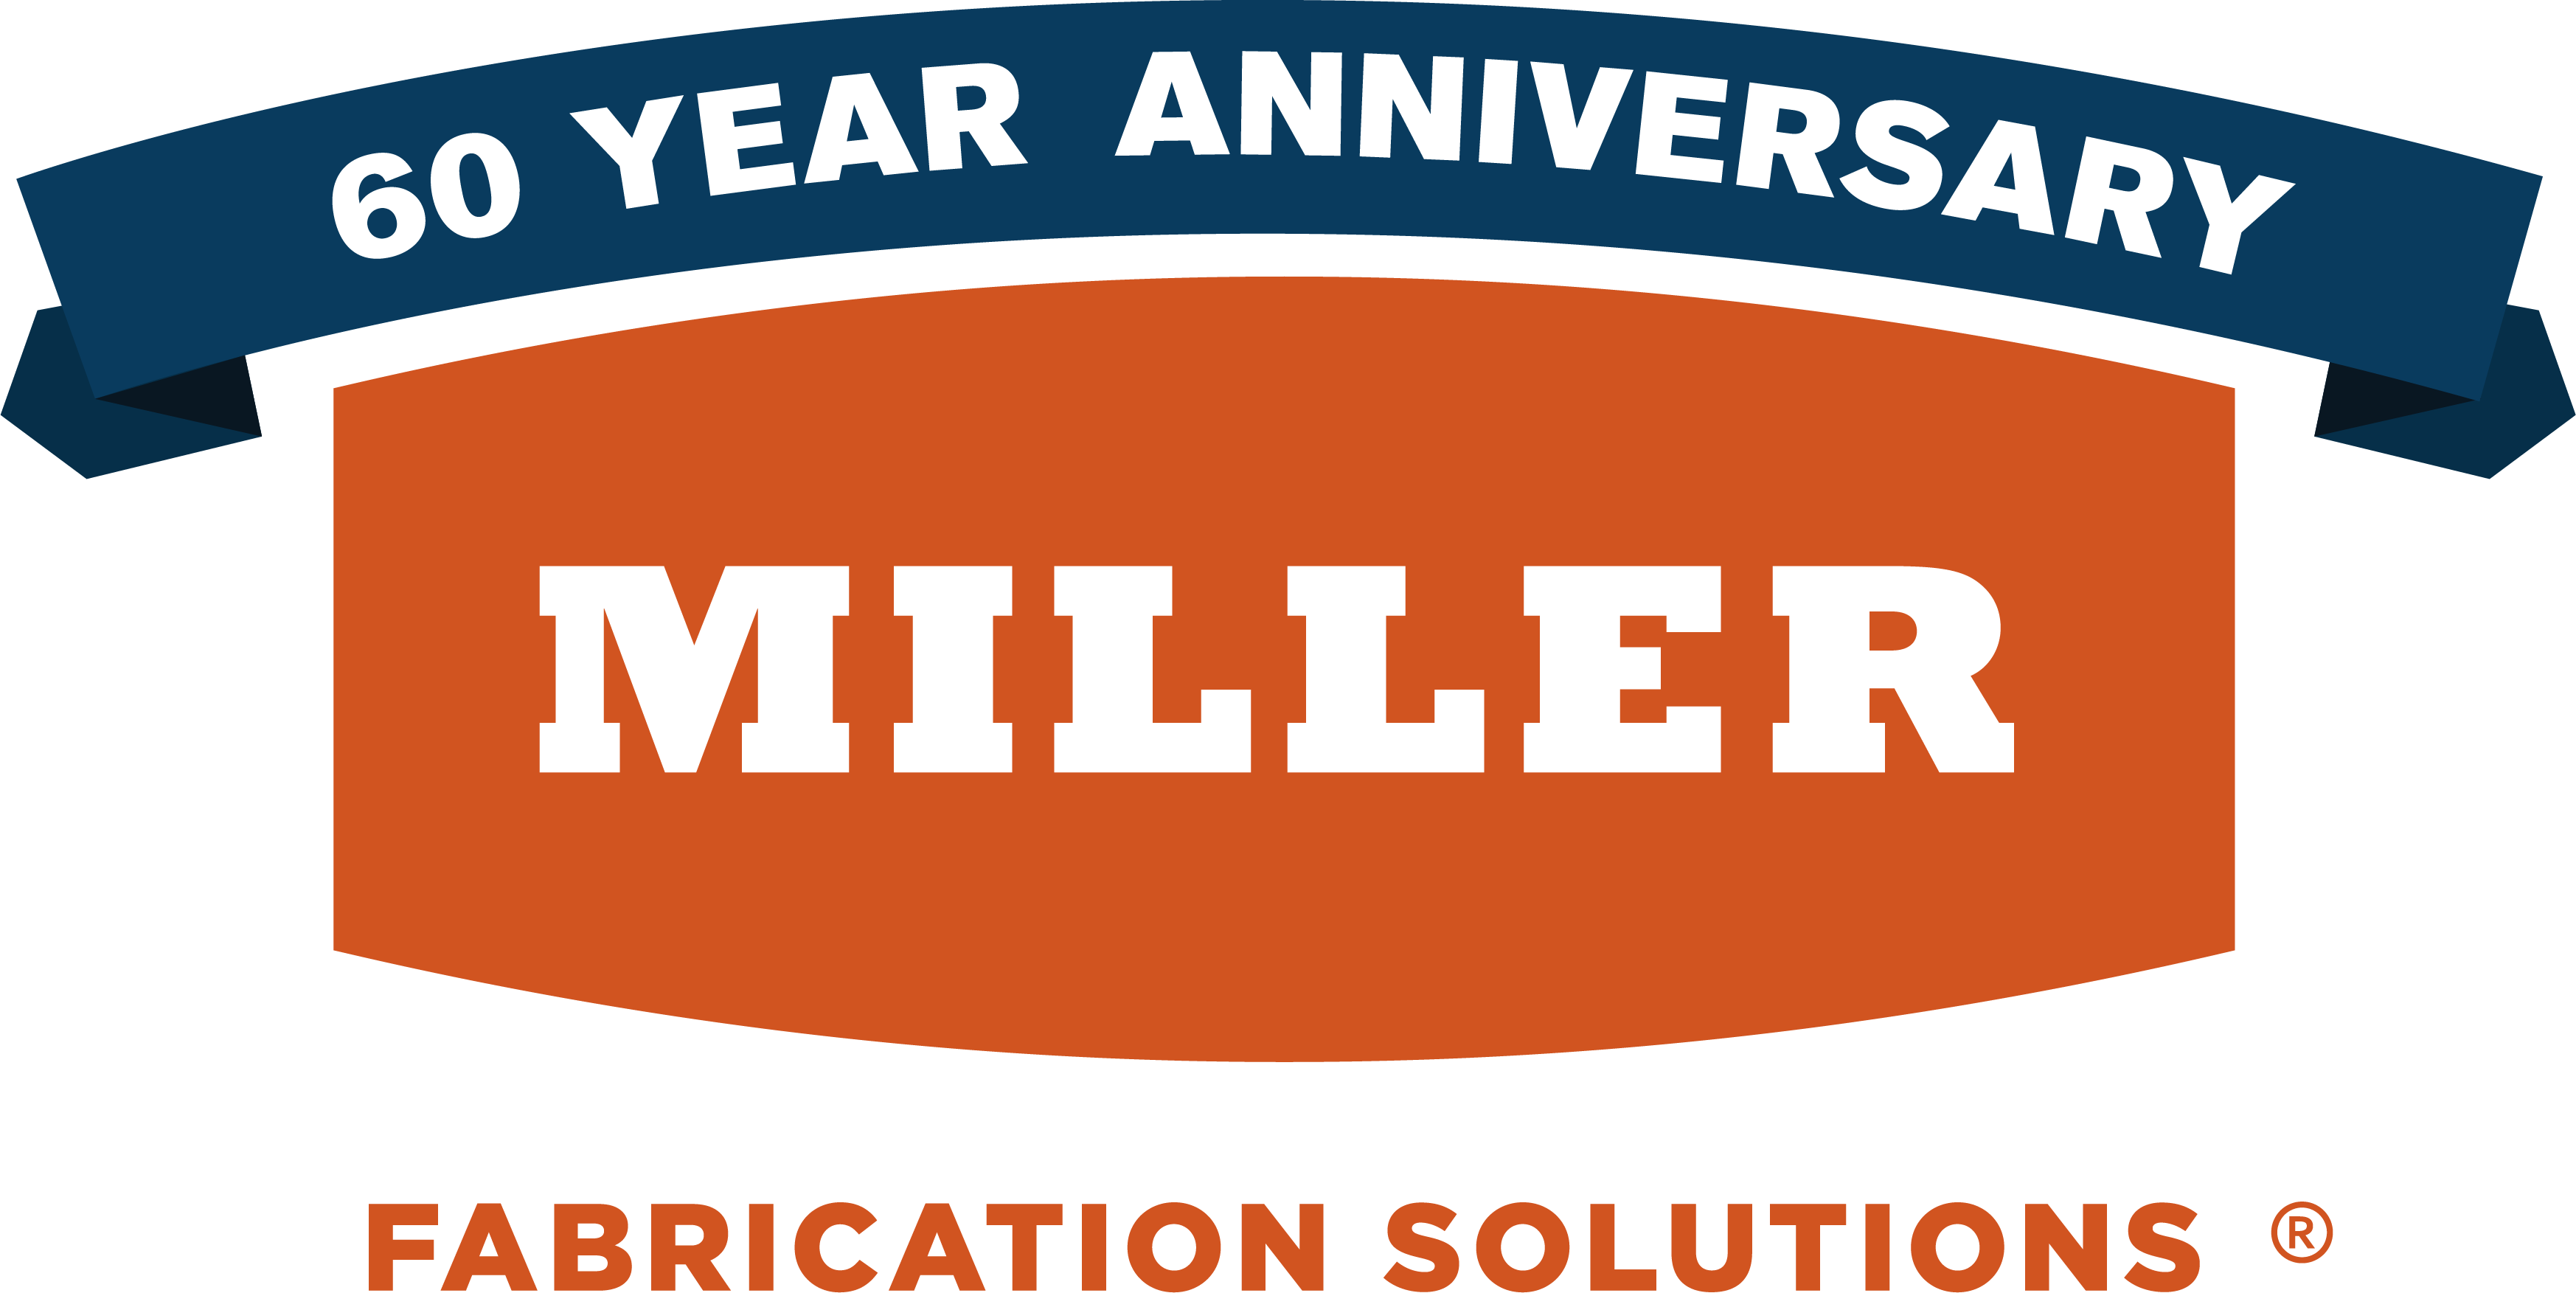 Miller Fabrication Solutions